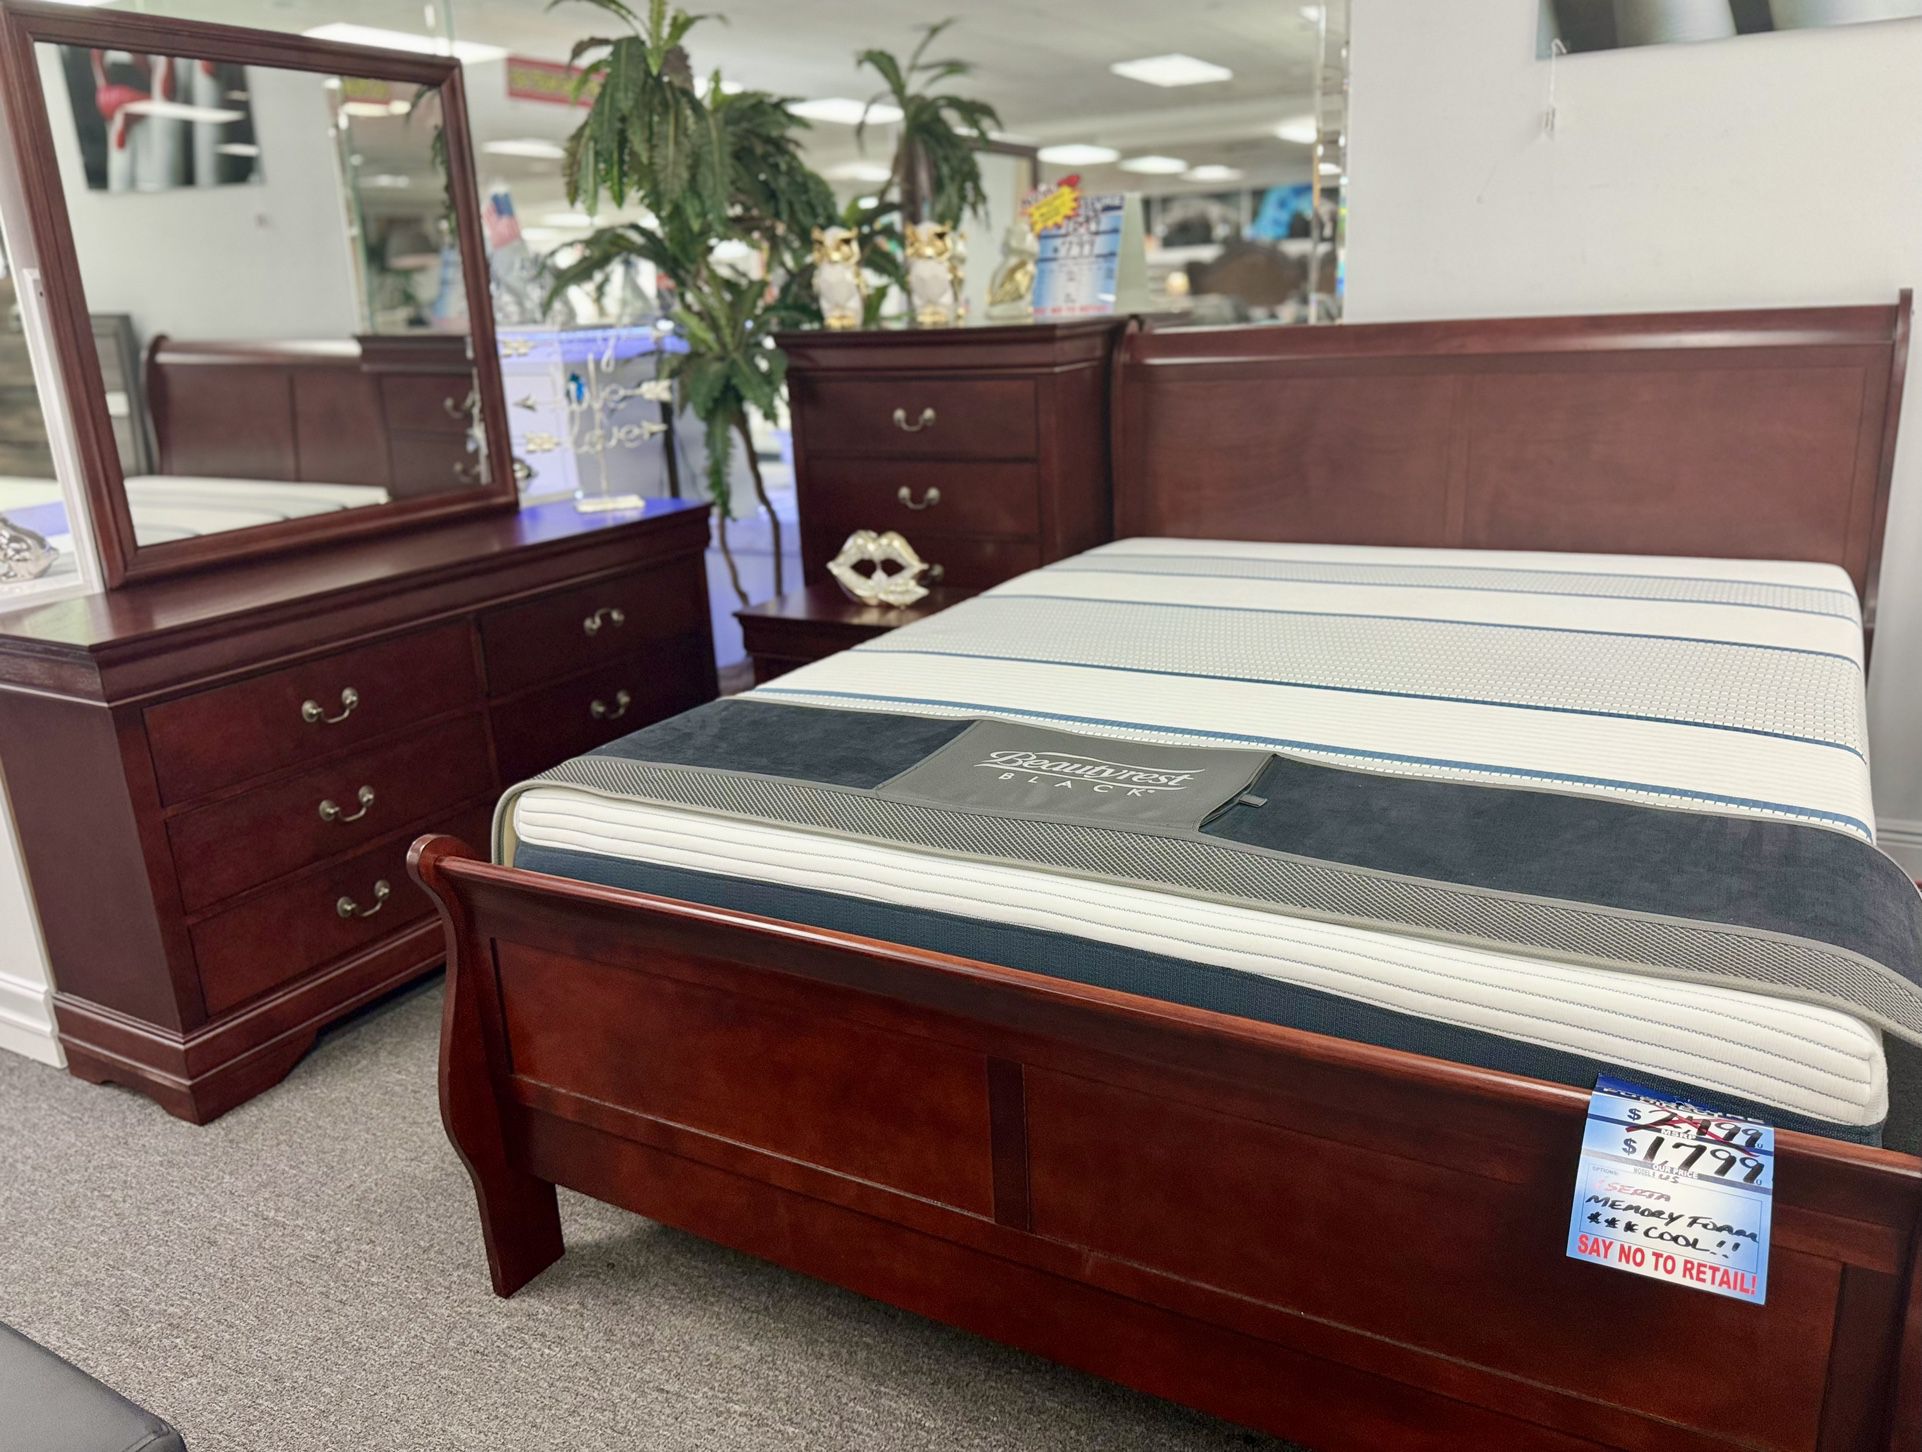 Bedroom Furniture Liquidation Sale🛑Gorgeous Cherry 5pc Bed Set Available Limited Time $499